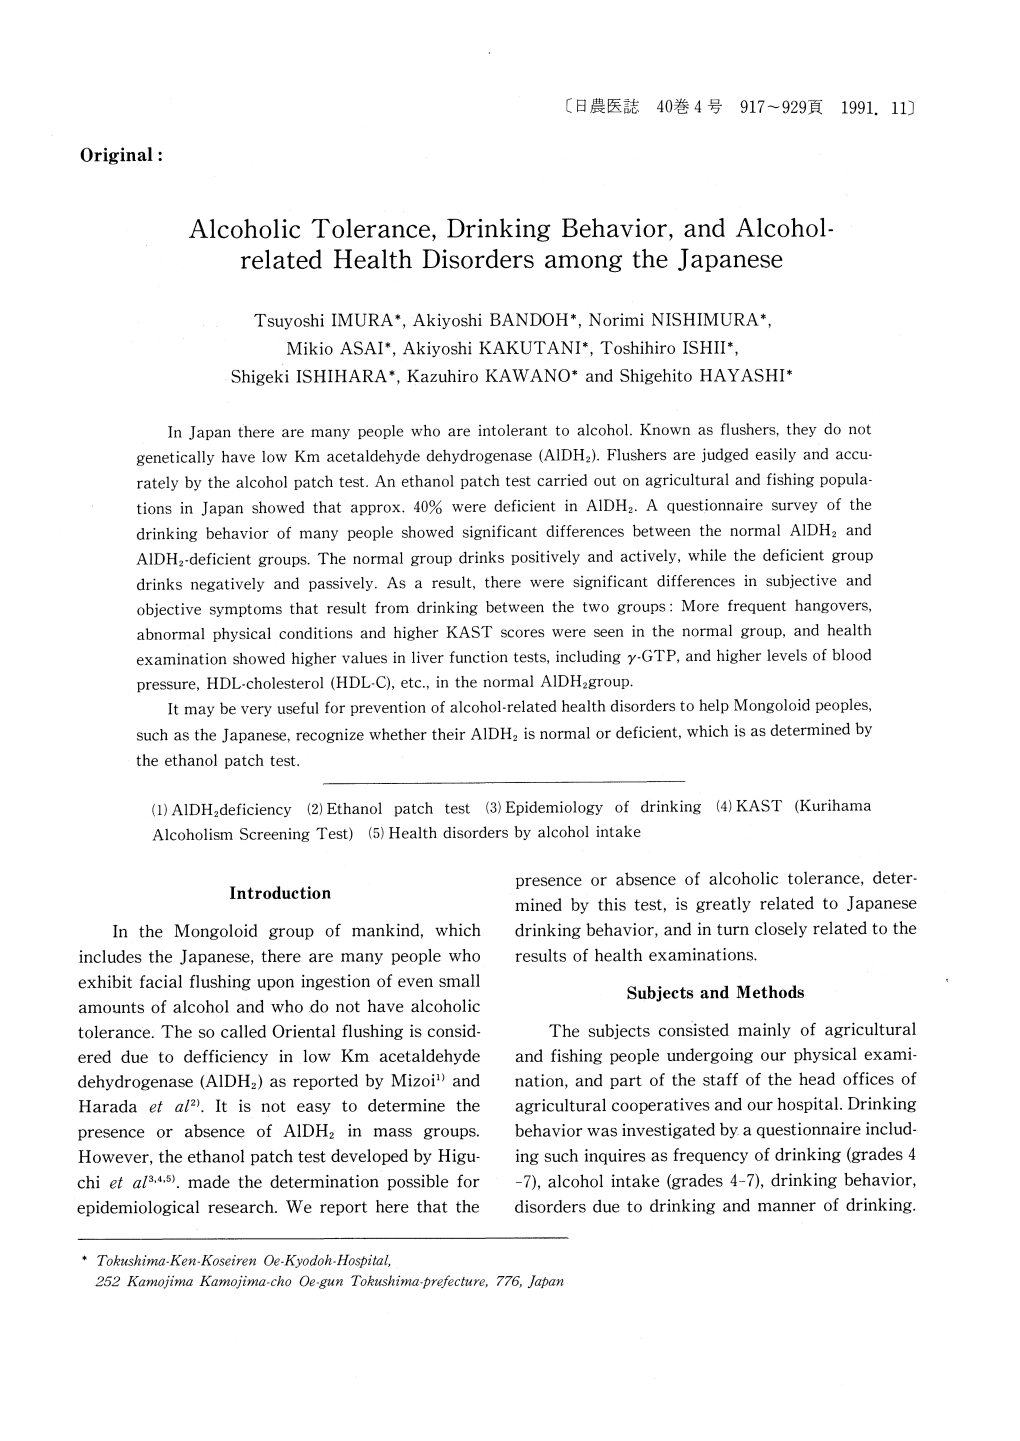 Alcoholic Tolerance, Drinking Behavior, and Alcohol- Related Health Disorders Among the Japanese